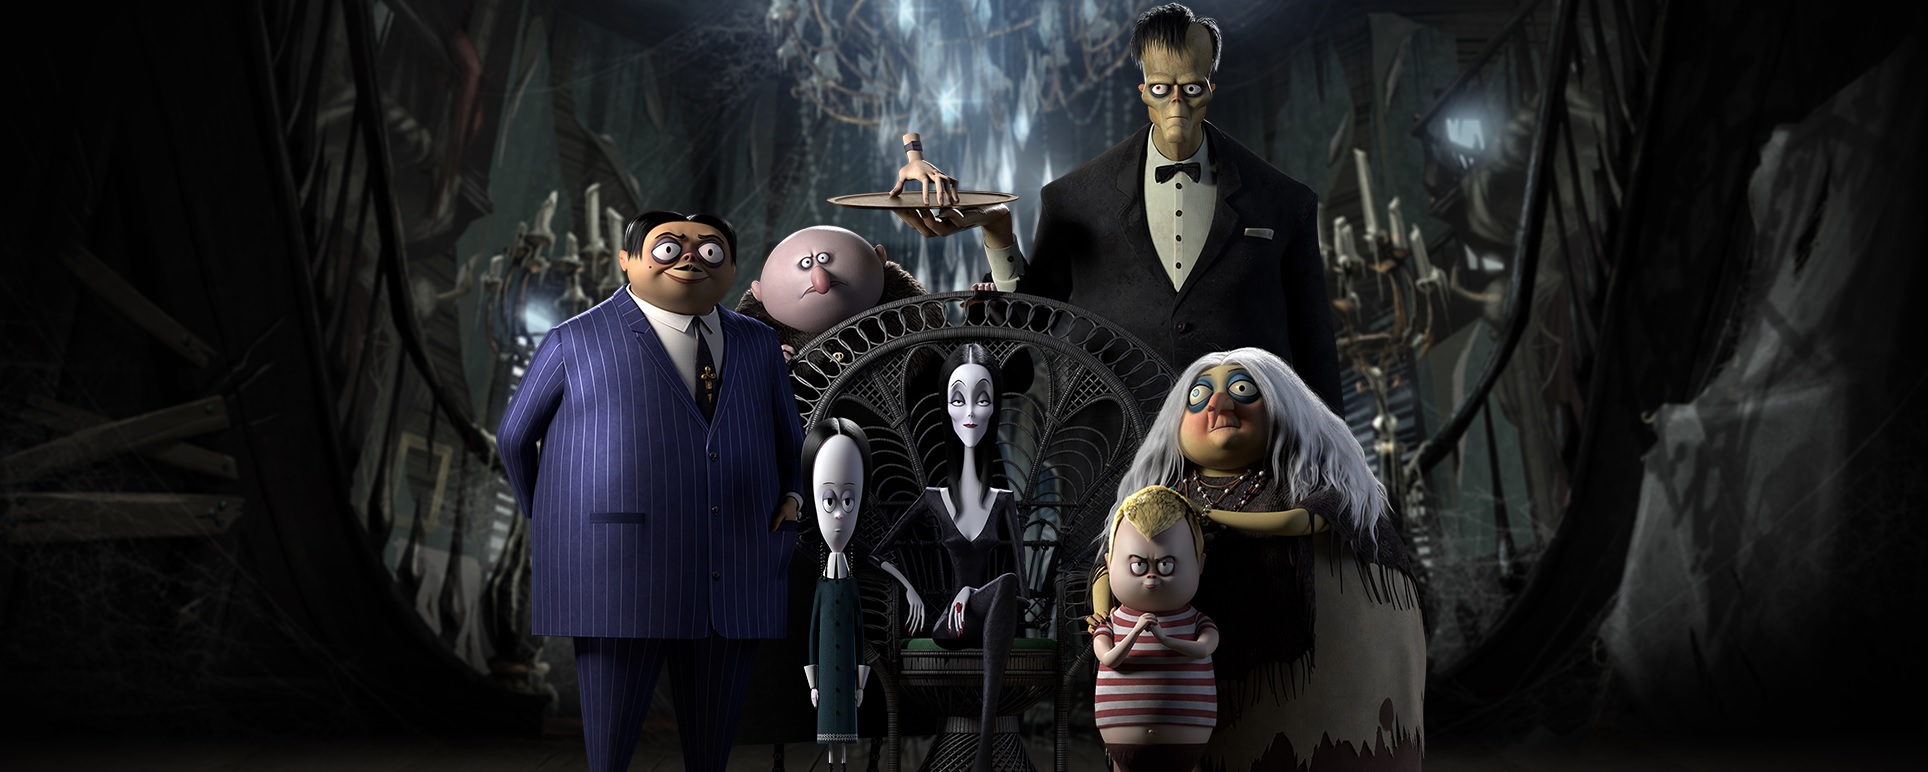 The Addams Family Gets an Animated Makeover at the Box Office - Zombies in  My Blog